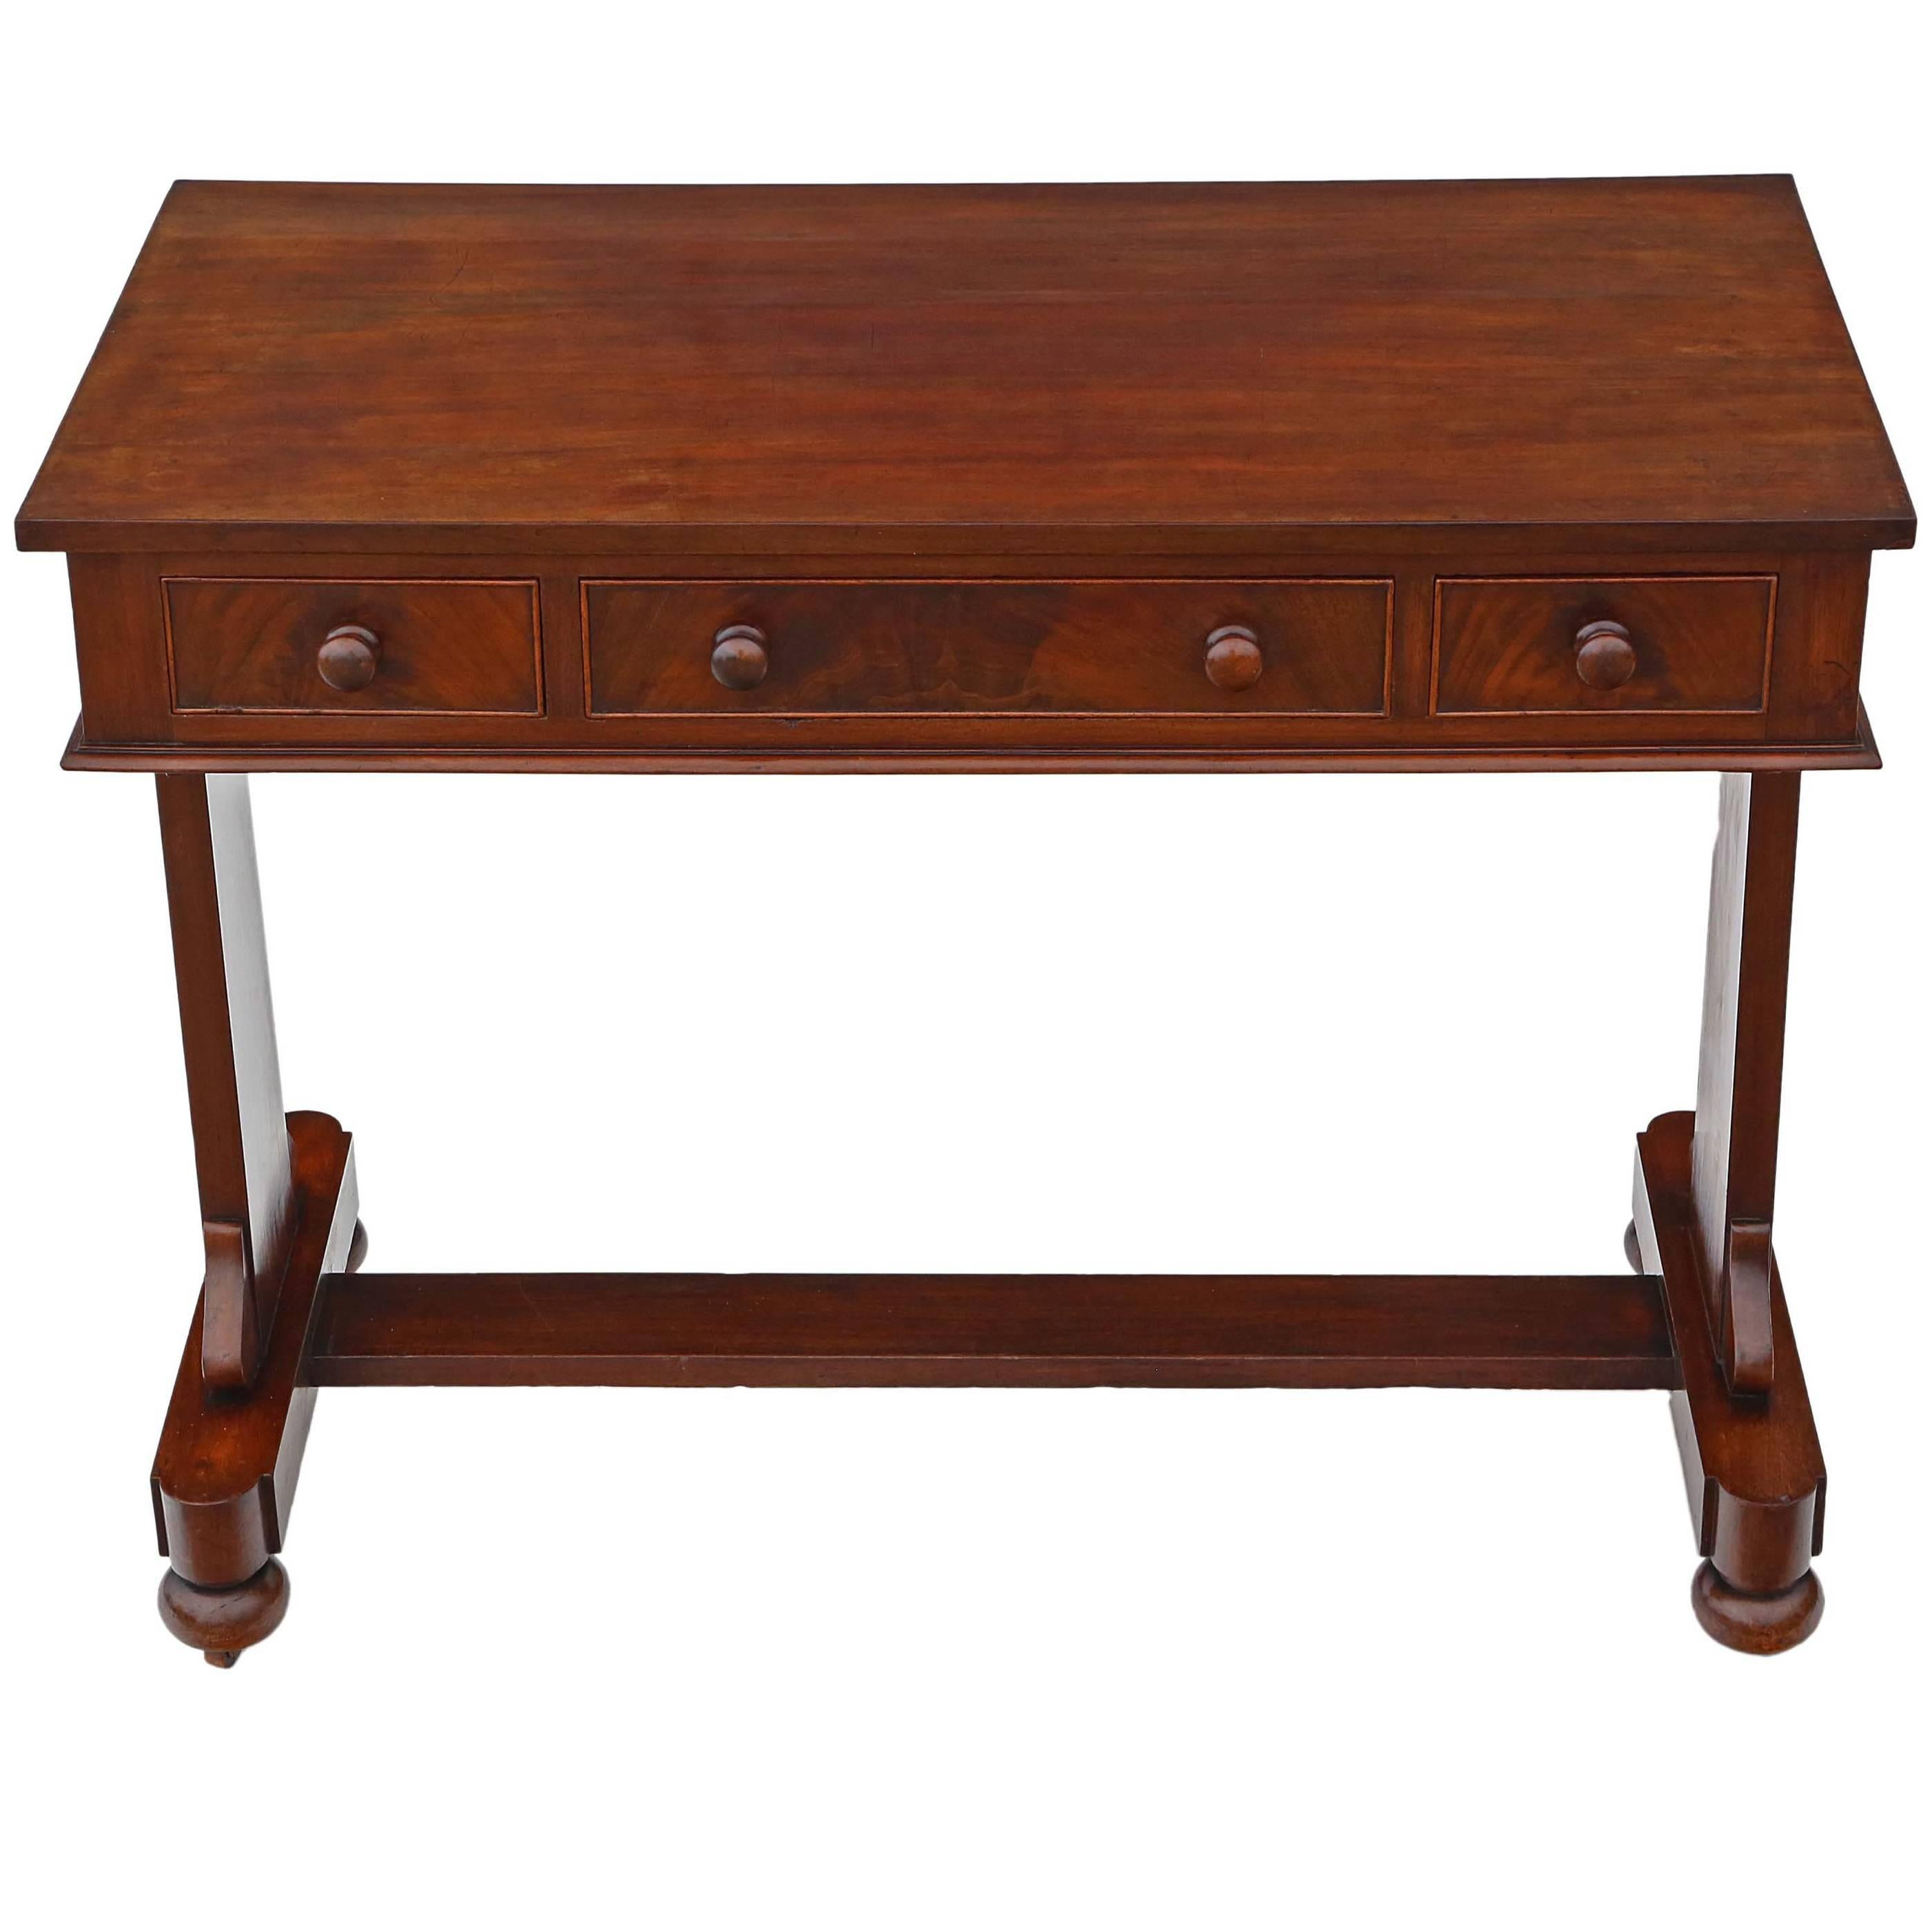 Antique Quality Victorian circa 1860 Mahogany Desk or Writing Table For Sale